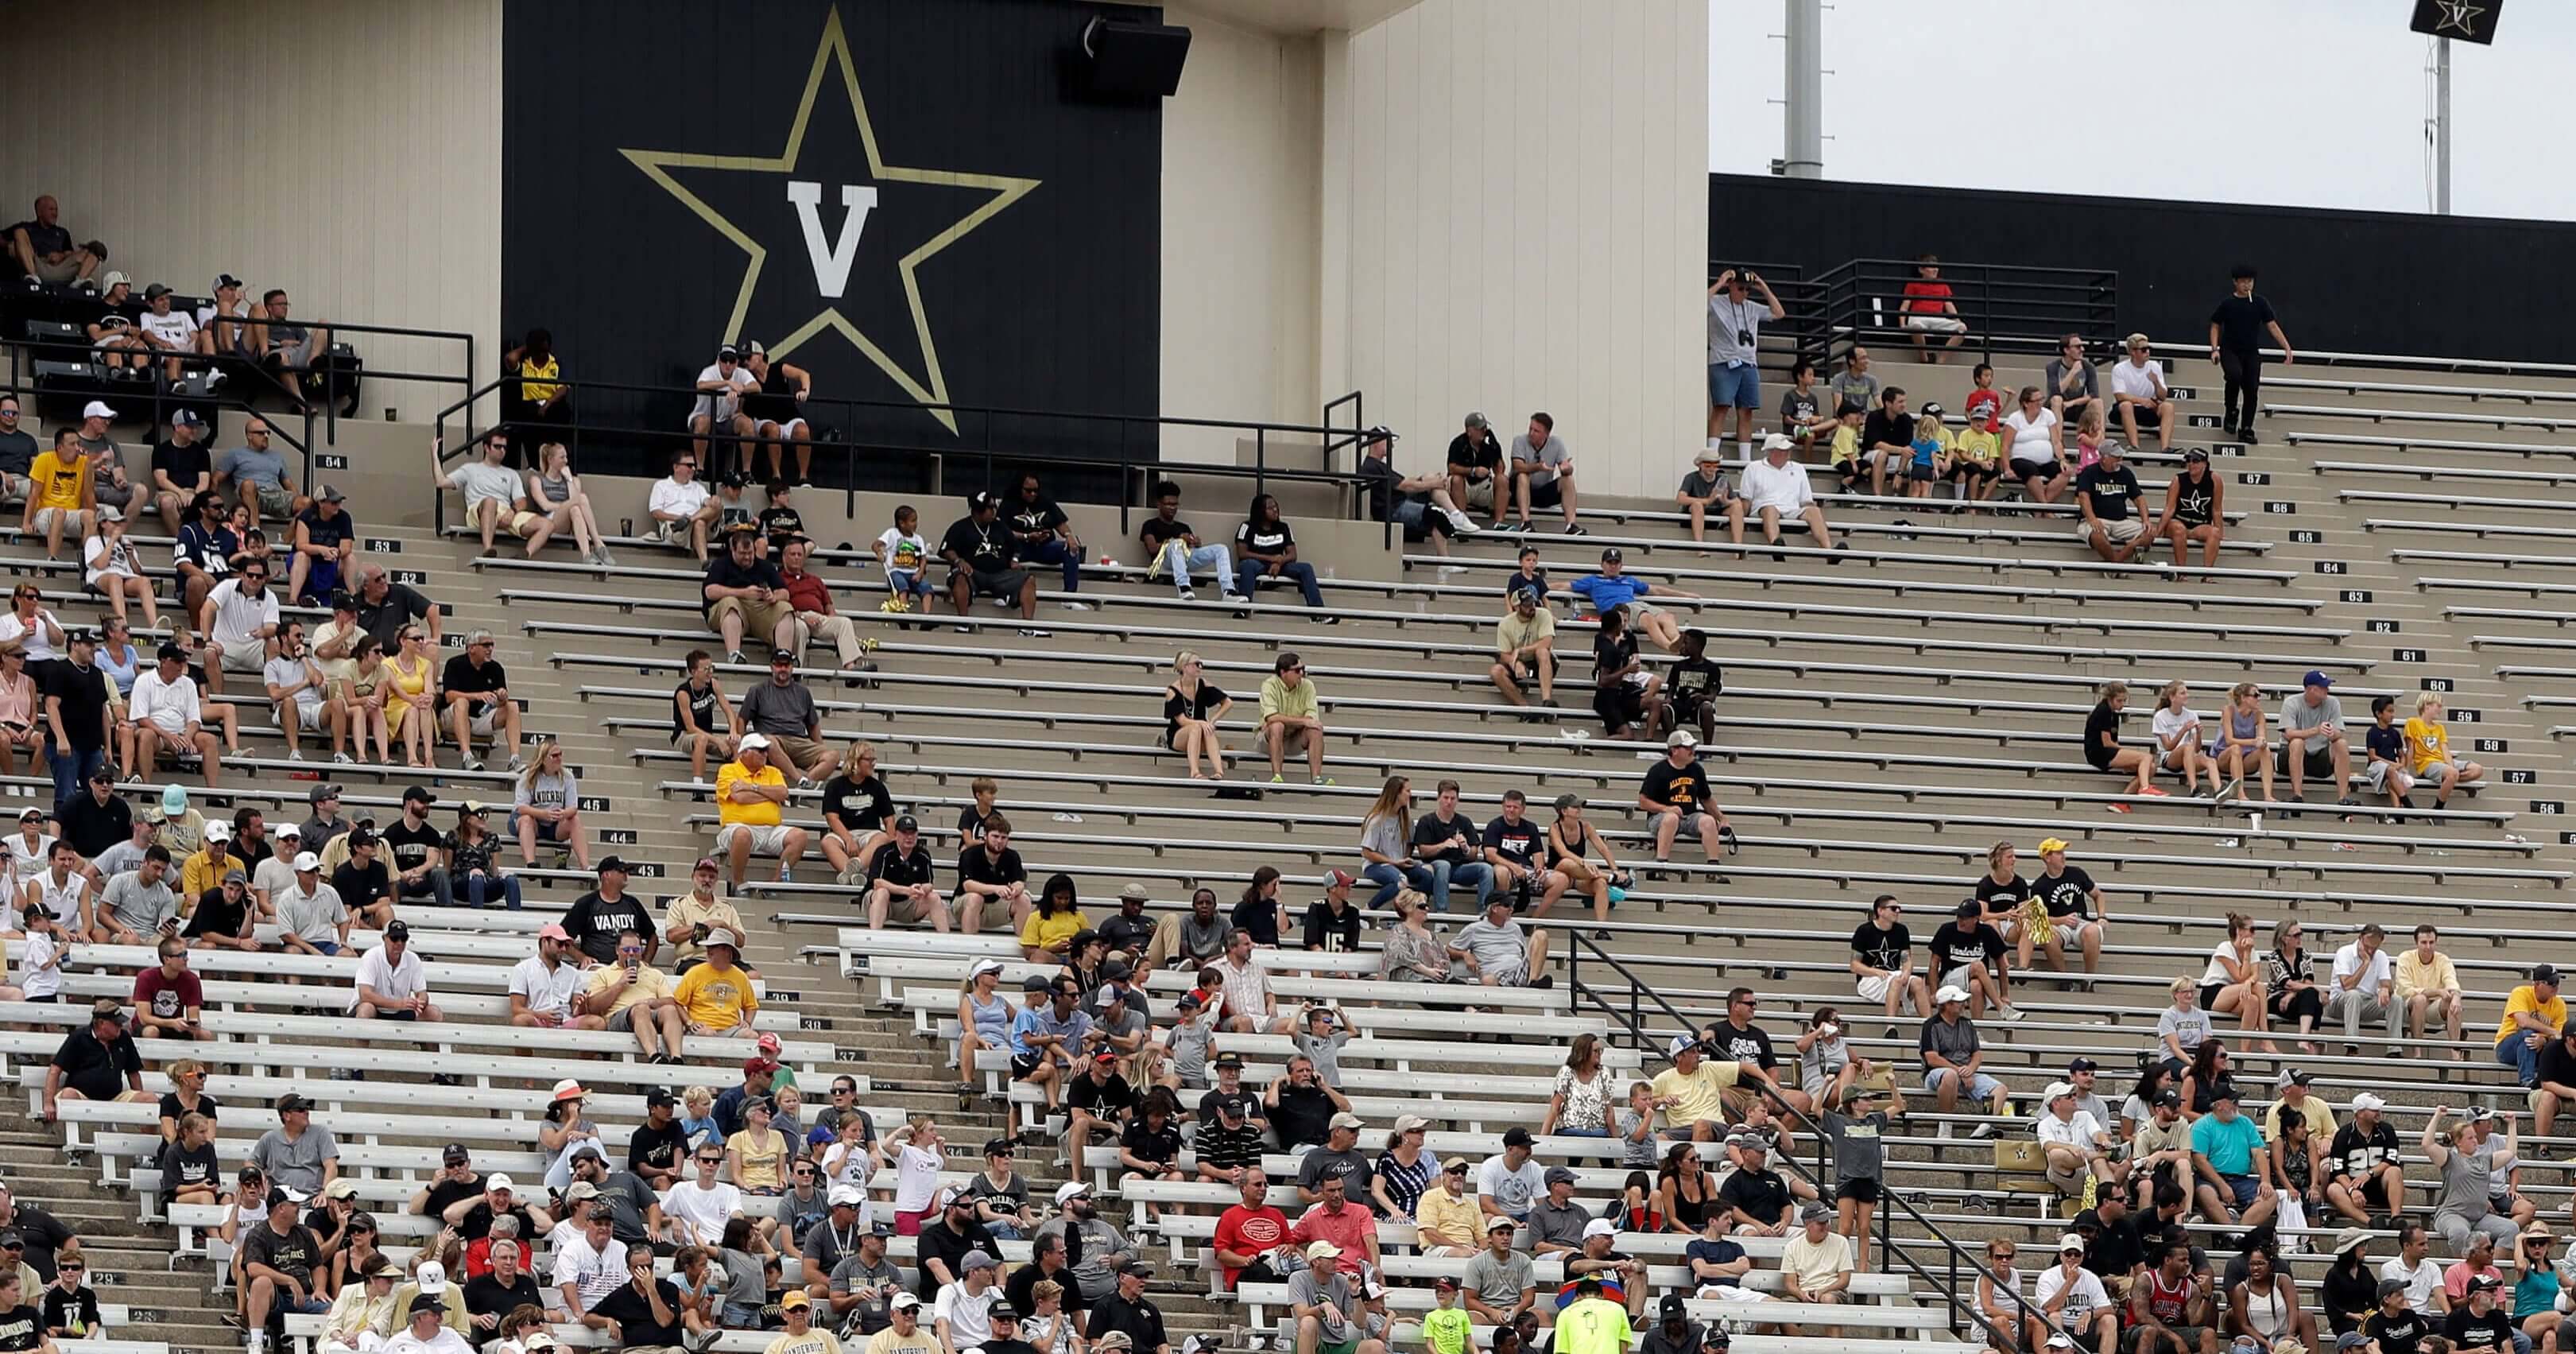 Fans sit in the stands at Vanderbilt Stadium in Nashville, Tennessee, during the second half of Vanderbilt's game against Nevada on Sept. 8. It will be a Virginia home game played on the road when the Cavaliers and Ohio meet at Vanderbilt Stadium on Saturday in a game that was moved earlier in the week with Hurricane Florence bearing down on the Mid-Atlantic Region.